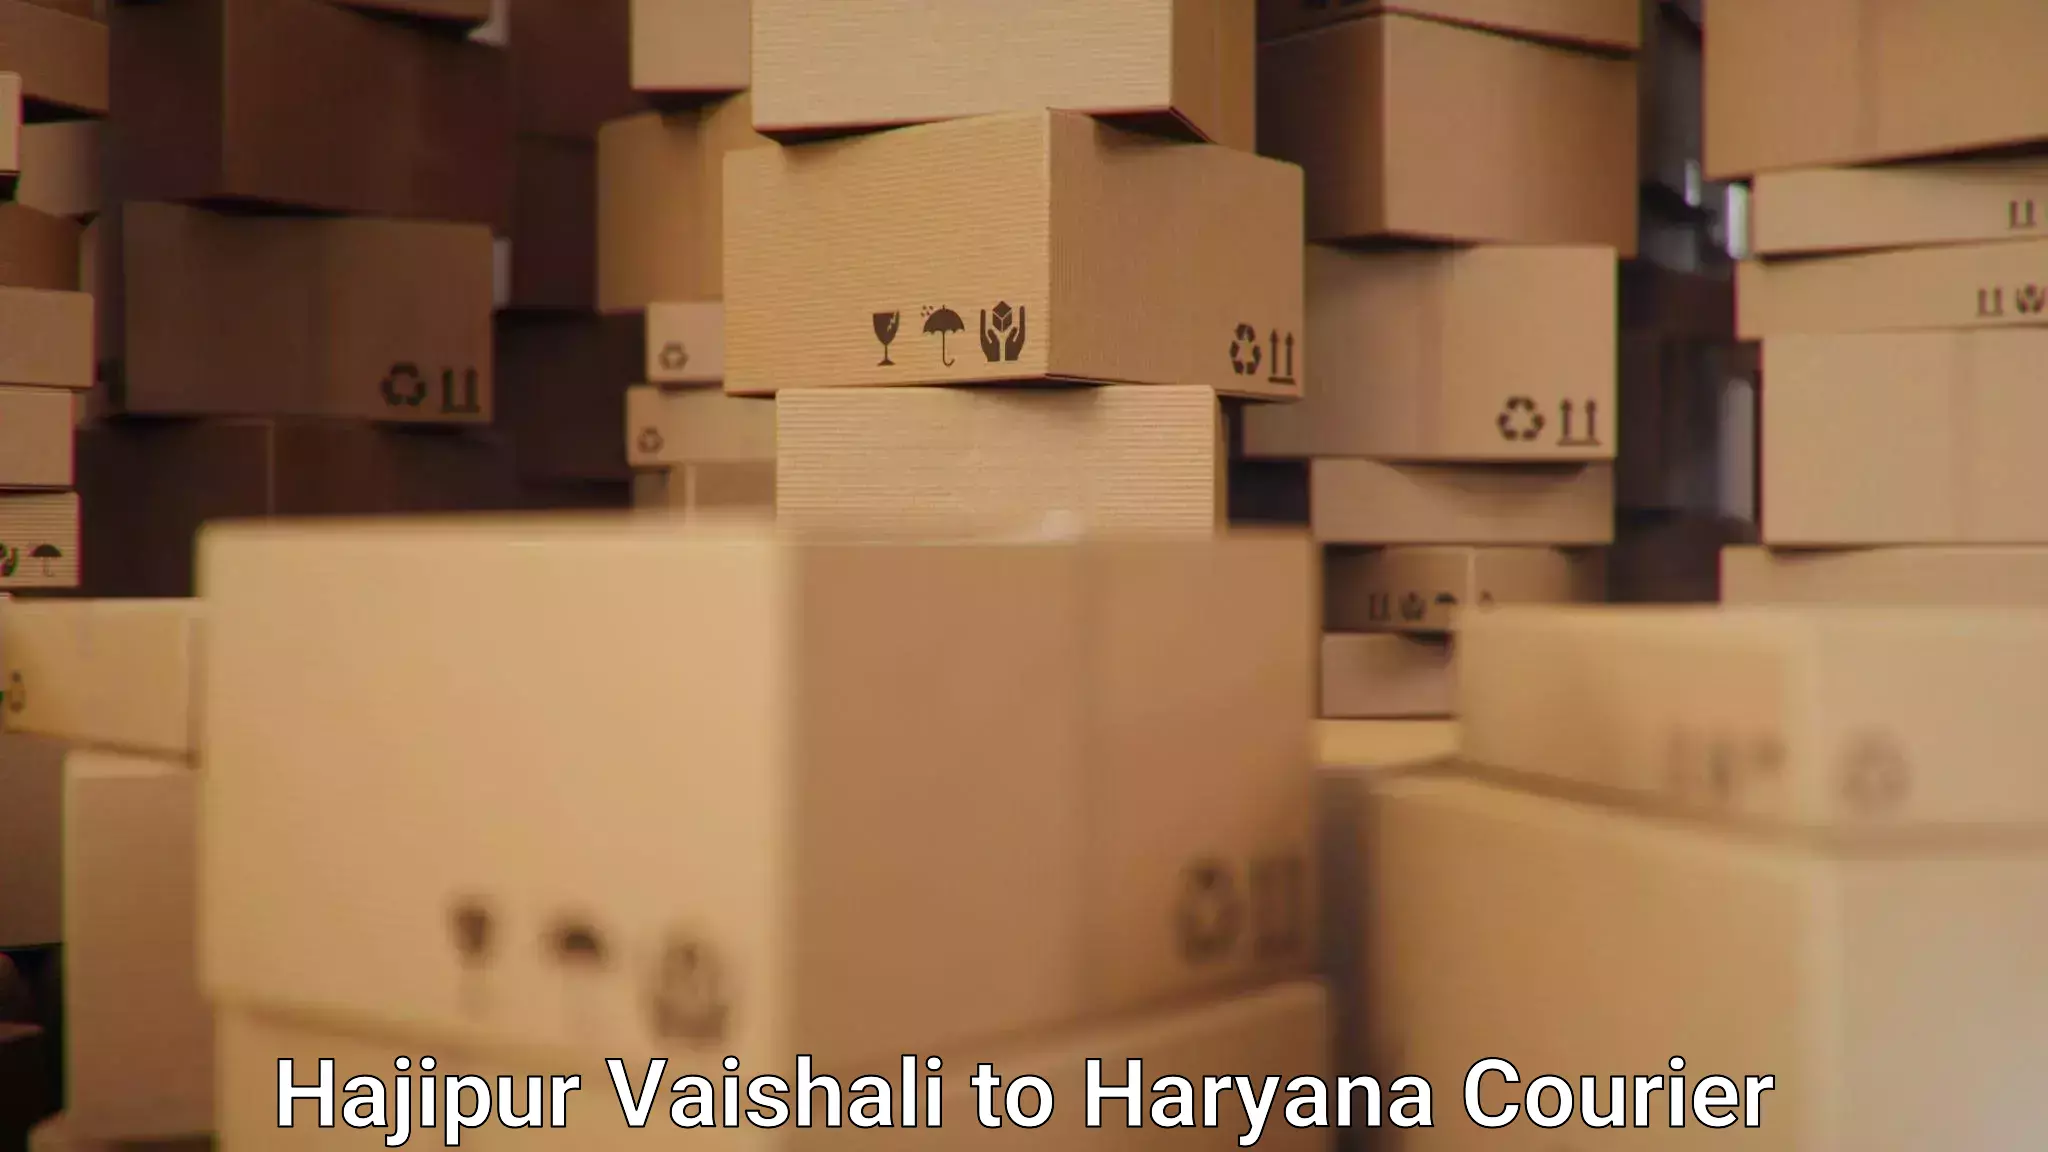 Sustainable courier practices in Hajipur Vaishali to Chaudhary Charan Singh Haryana Agricultural University Hisar